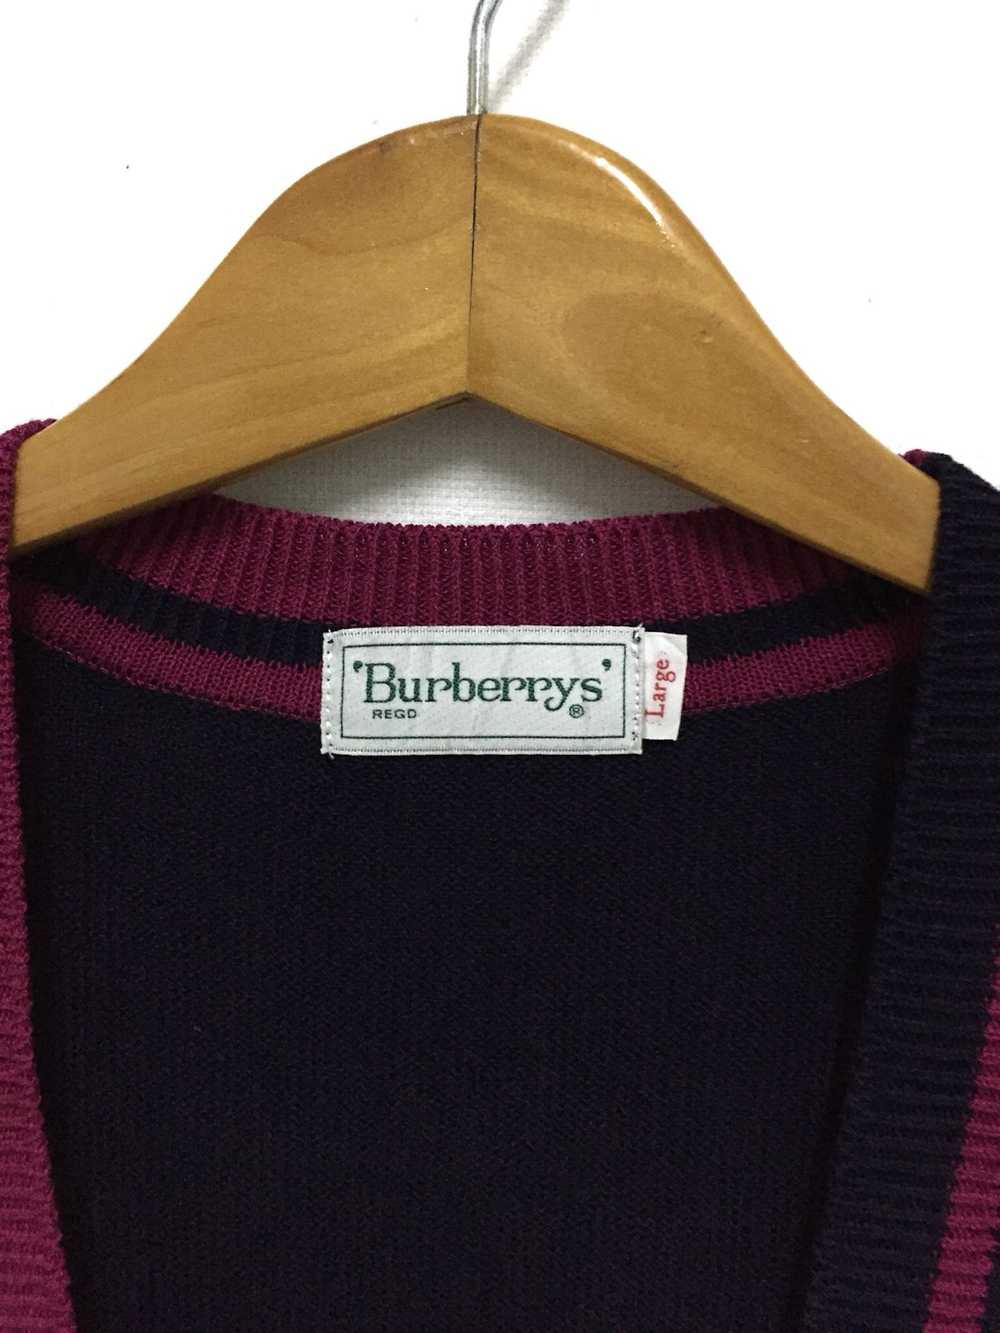 Burberry Burberrys Formal Vest Shirt Spell Out - image 3